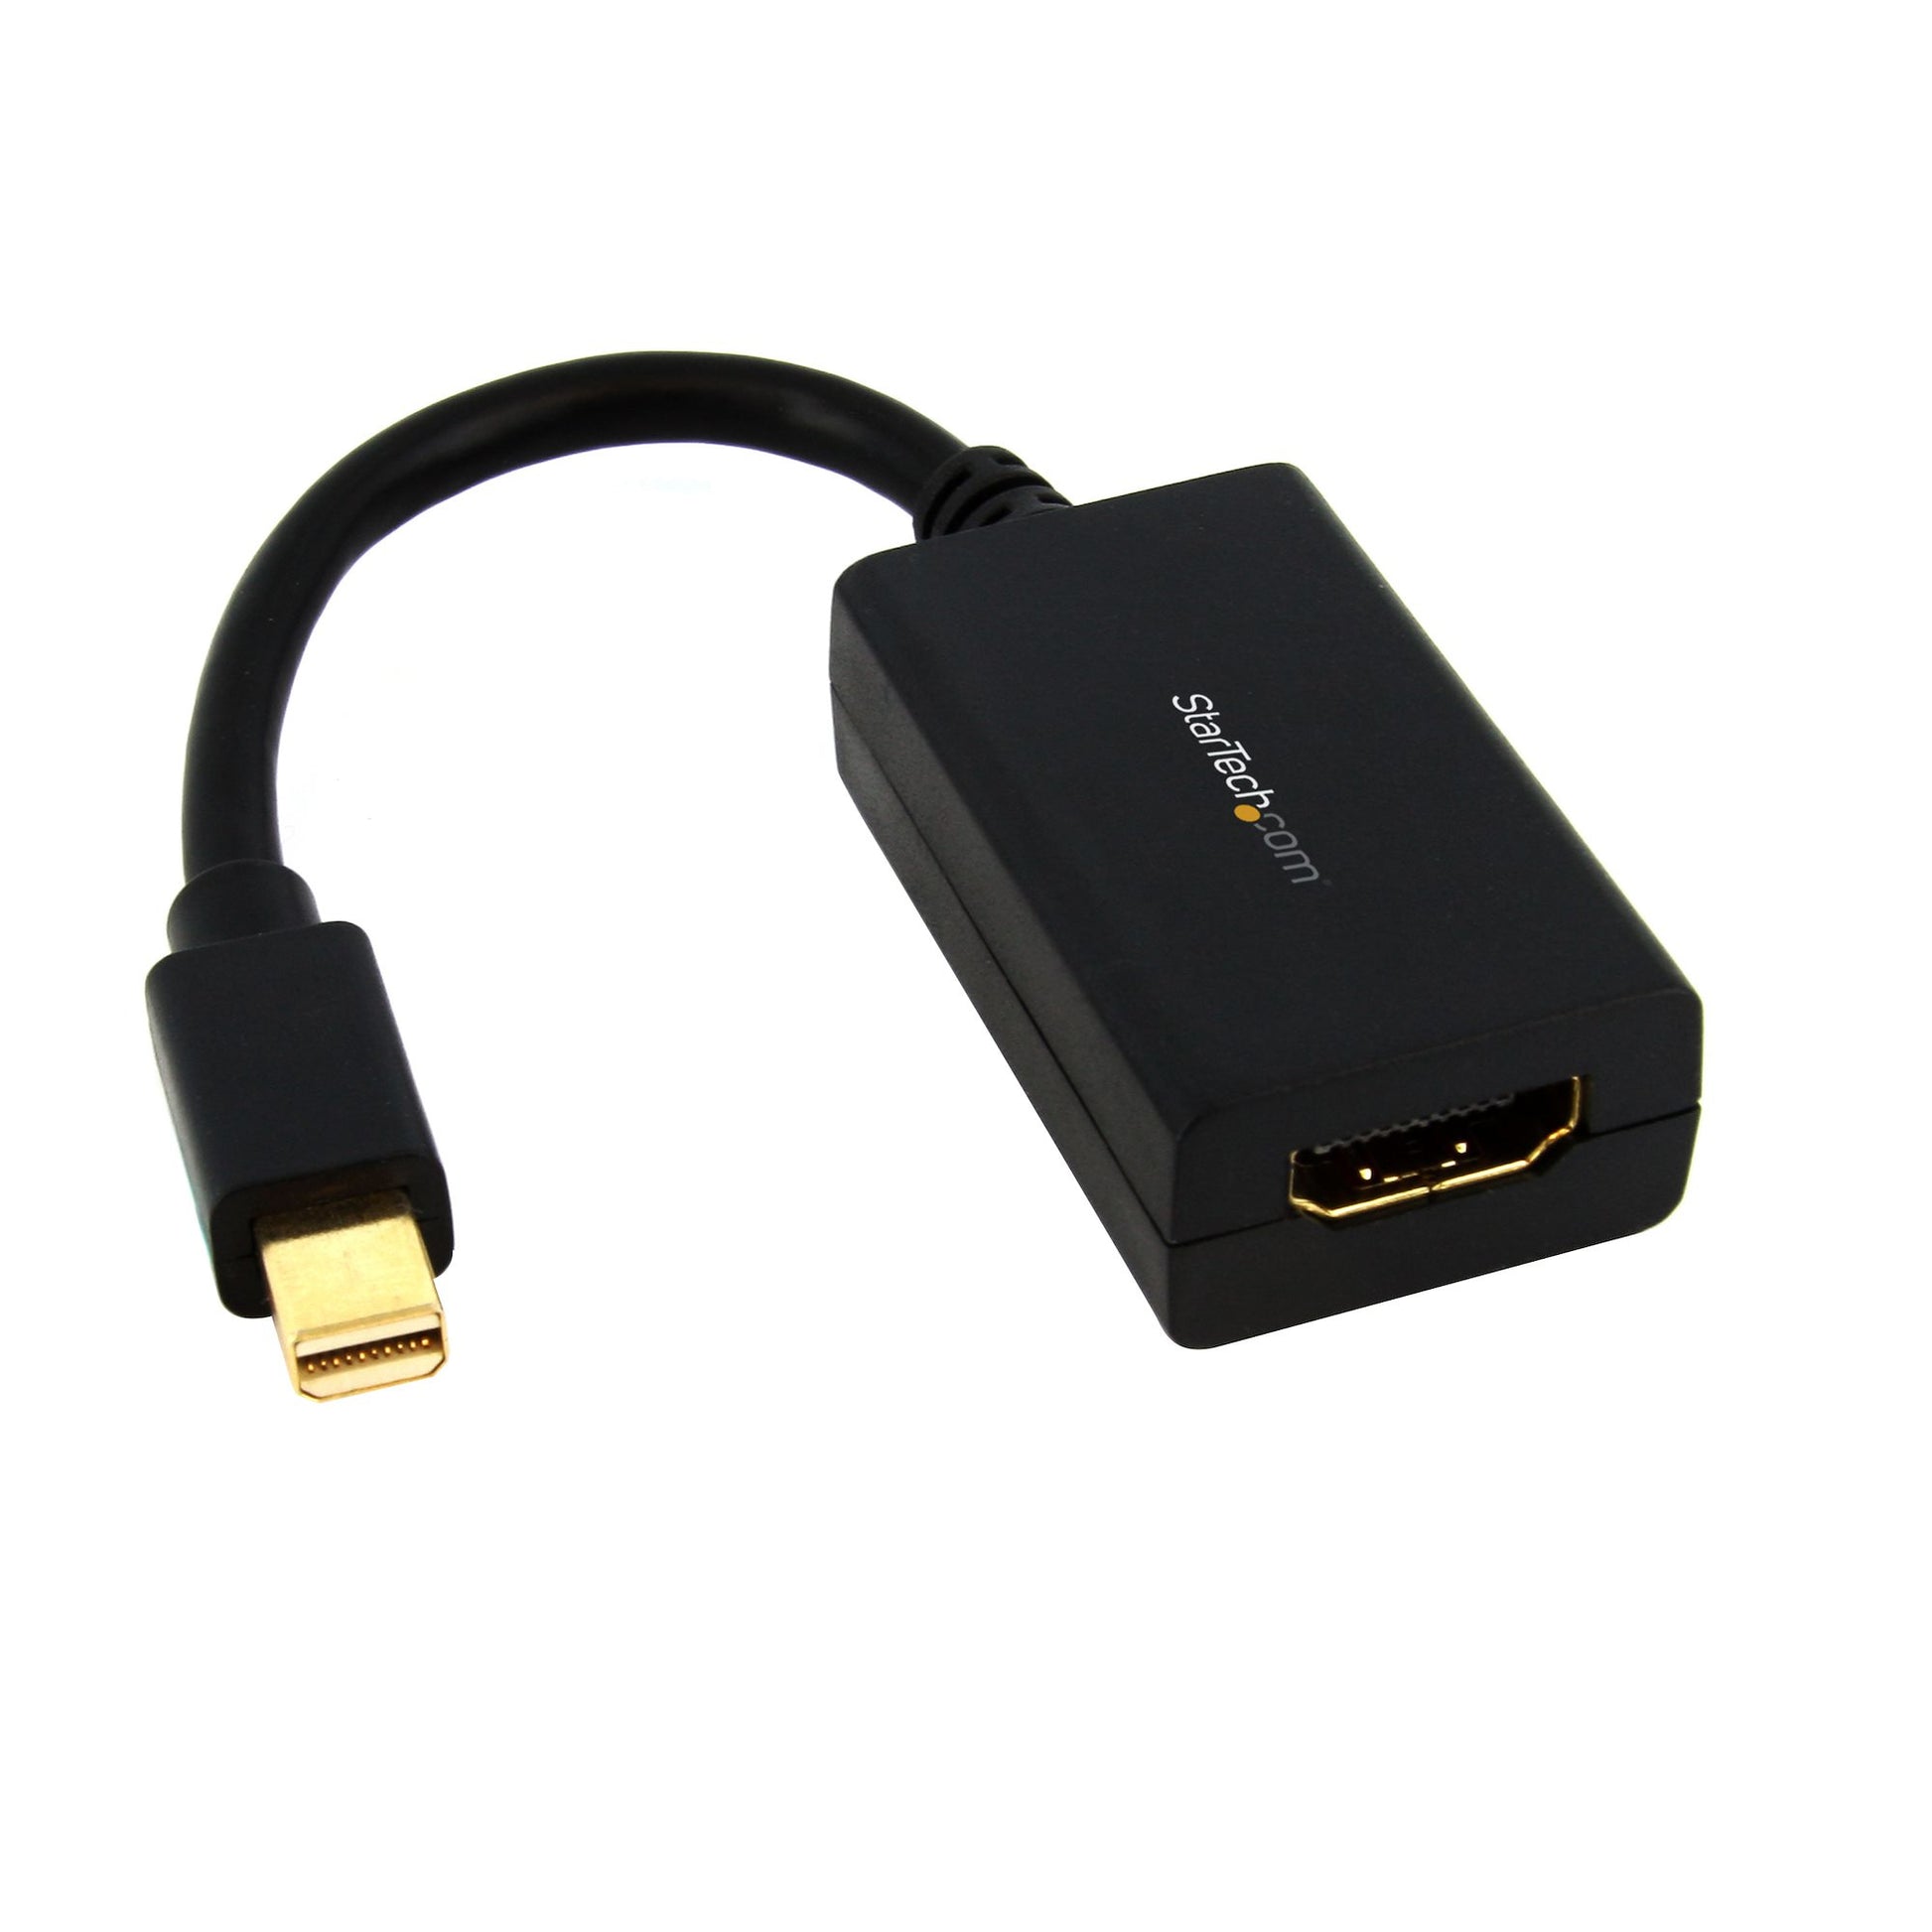 StarTech.com Mini DisplayPort to HDMI Adapter - mDP to HDMI Video Converter - 1080p - Mini DP or Thunderbolt 1/2 Mac/PC to HDMI Monitor/Display/TV - Passive mDP 1.2 to HDMI Adapter Dongle - Upgraded Version is MDP2HDEC-0